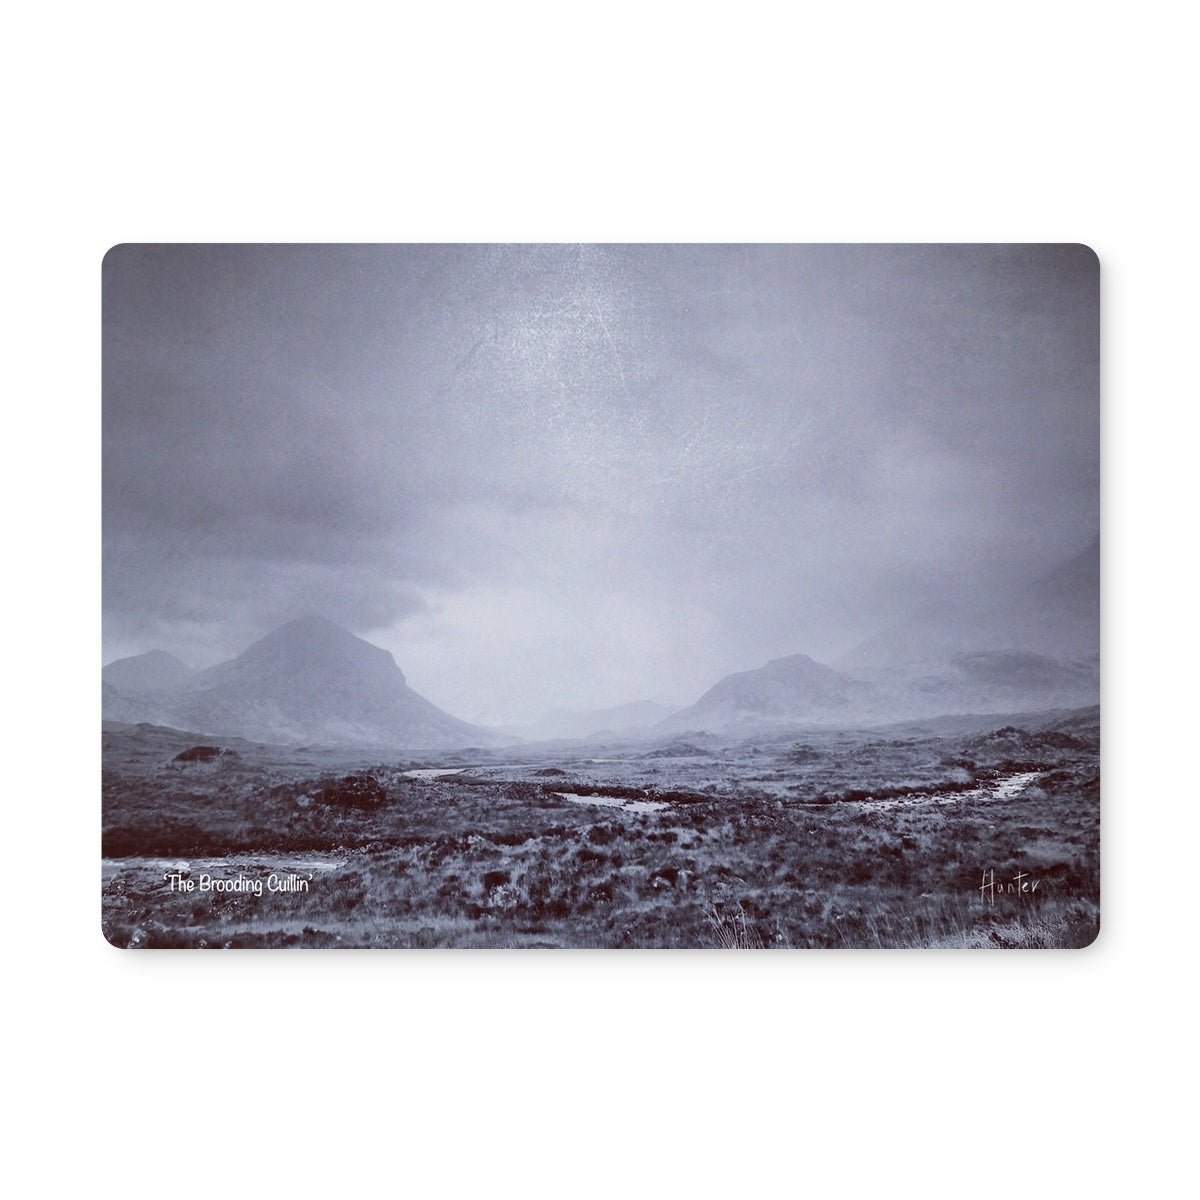 The Brooding Cuillin Skye Art Gifts Placemat-Placemats-Skye Art Gallery-6 Placemats-Paintings, Prints, Homeware, Art Gifts From Scotland By Scottish Artist Kevin Hunter